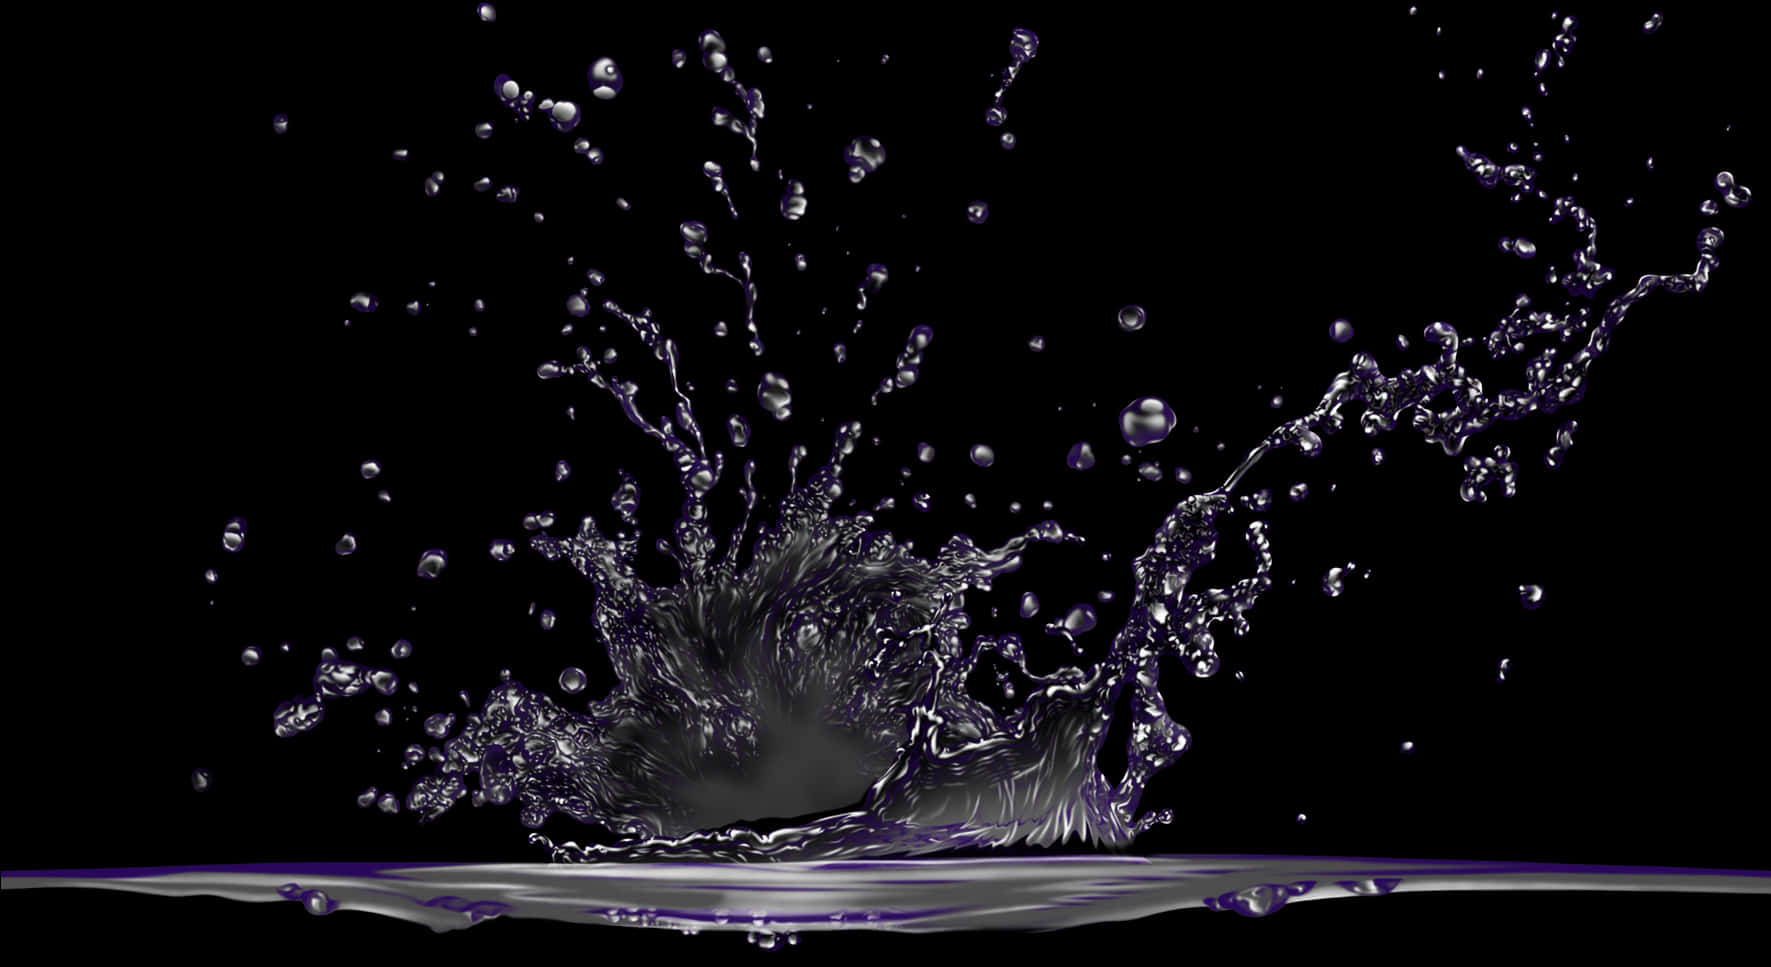 A Water Splashing Out Of The Water